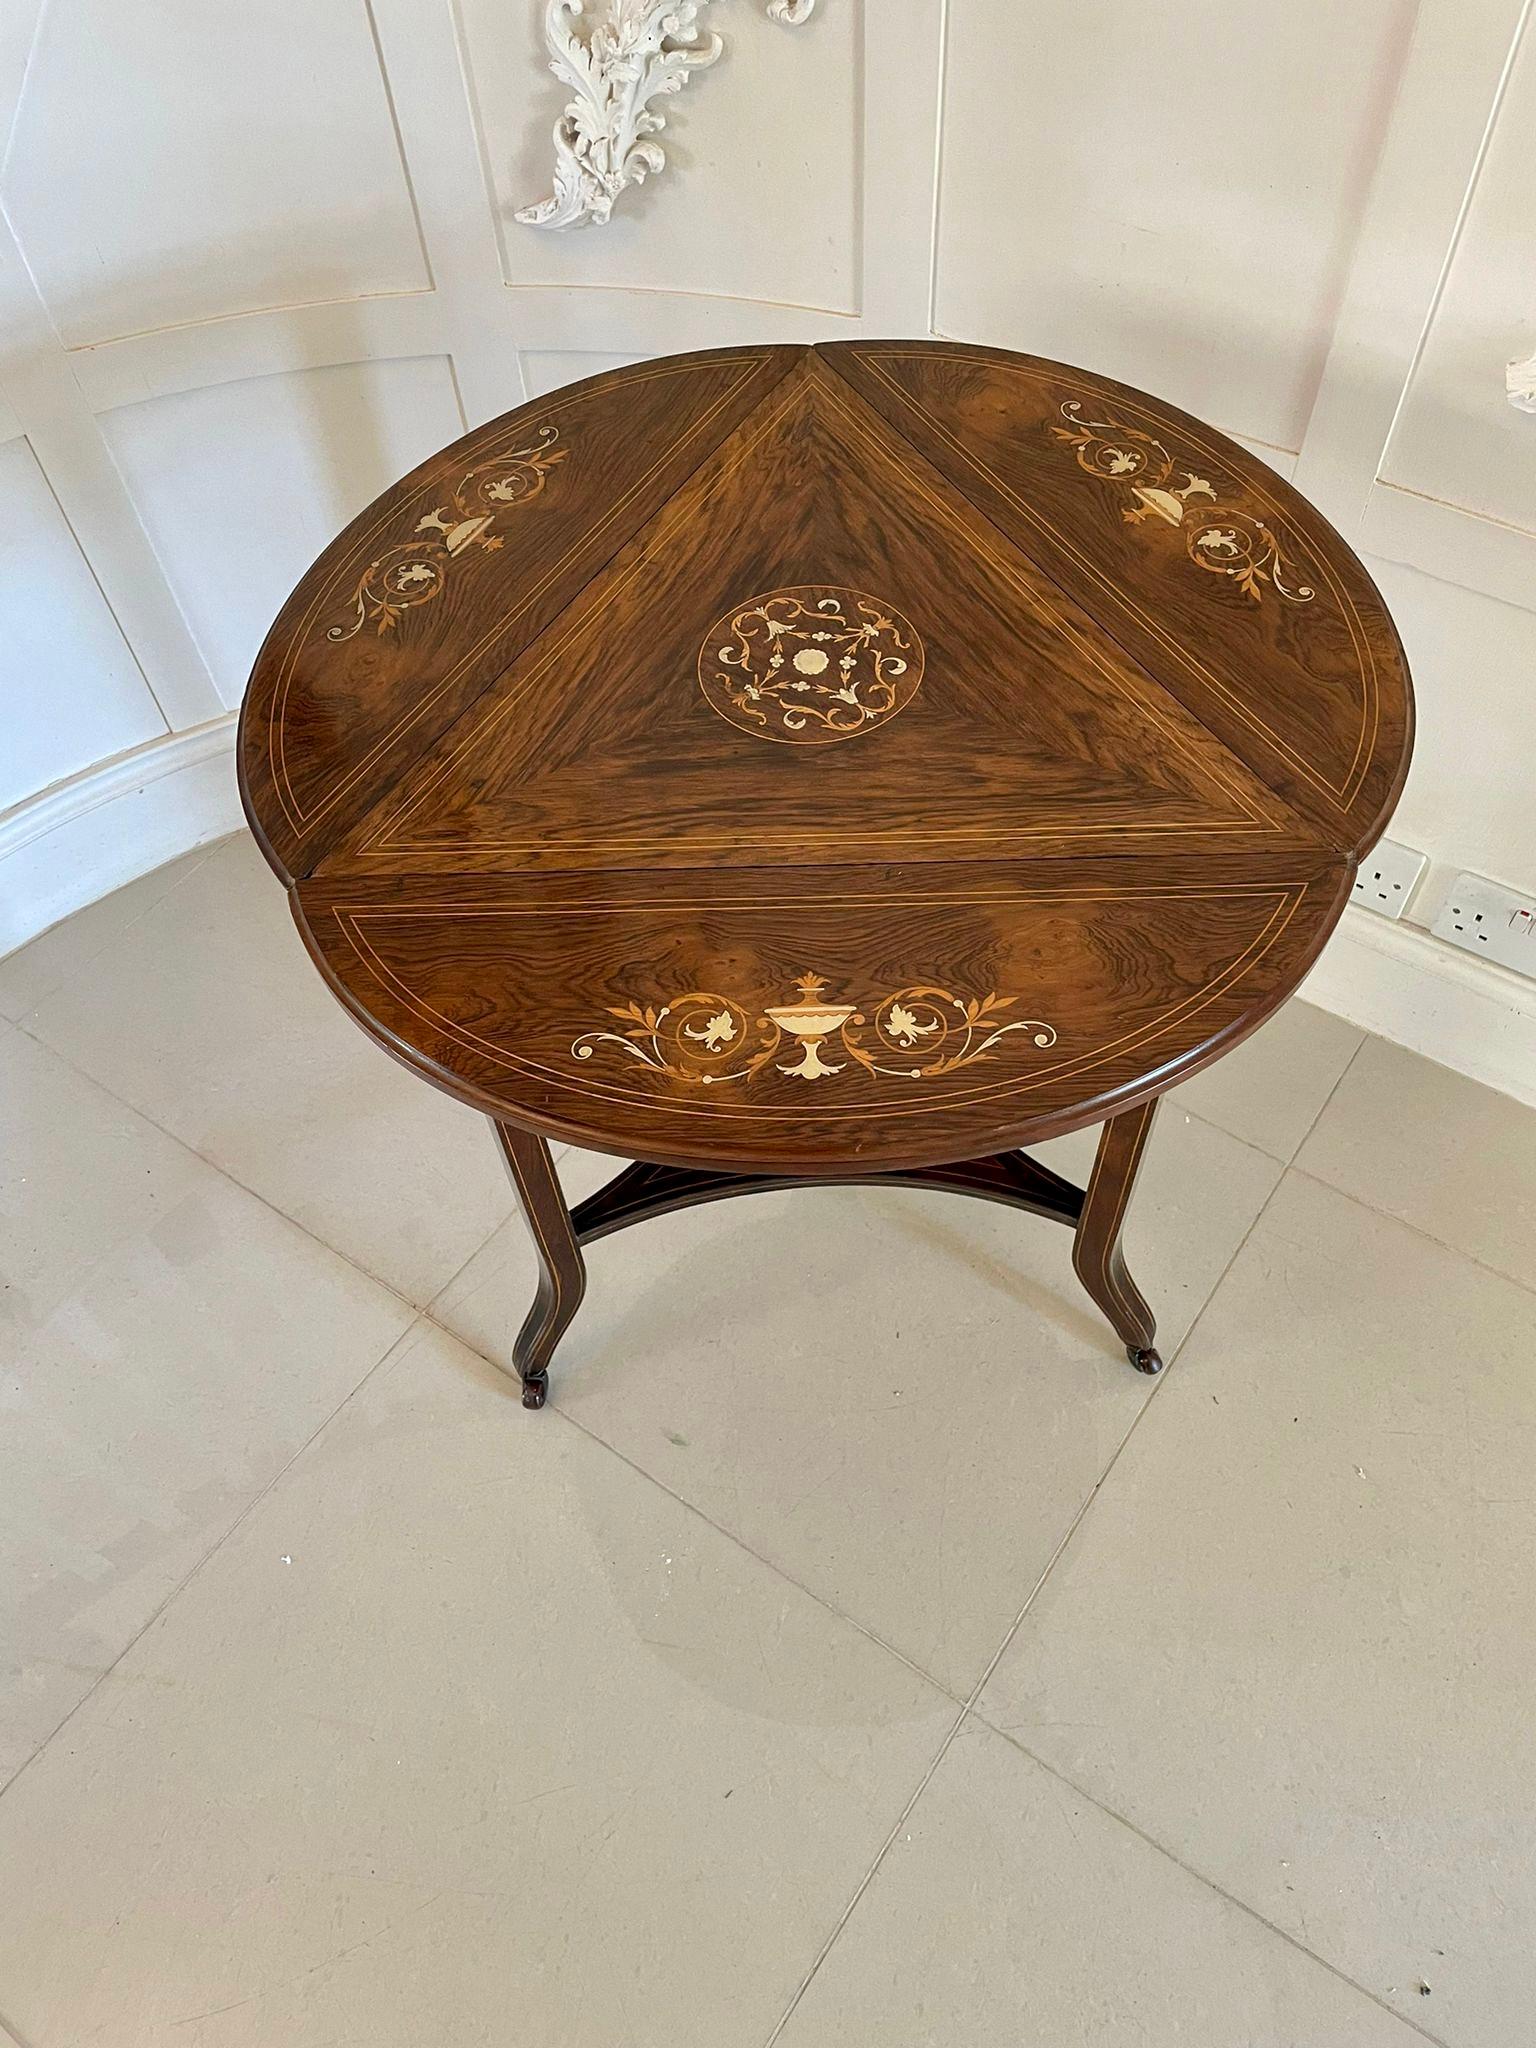 Mid-19th Century Unusual Antique Edwardian Quality Rosewood Inlaid Drop Leaf Centre Table For Sale